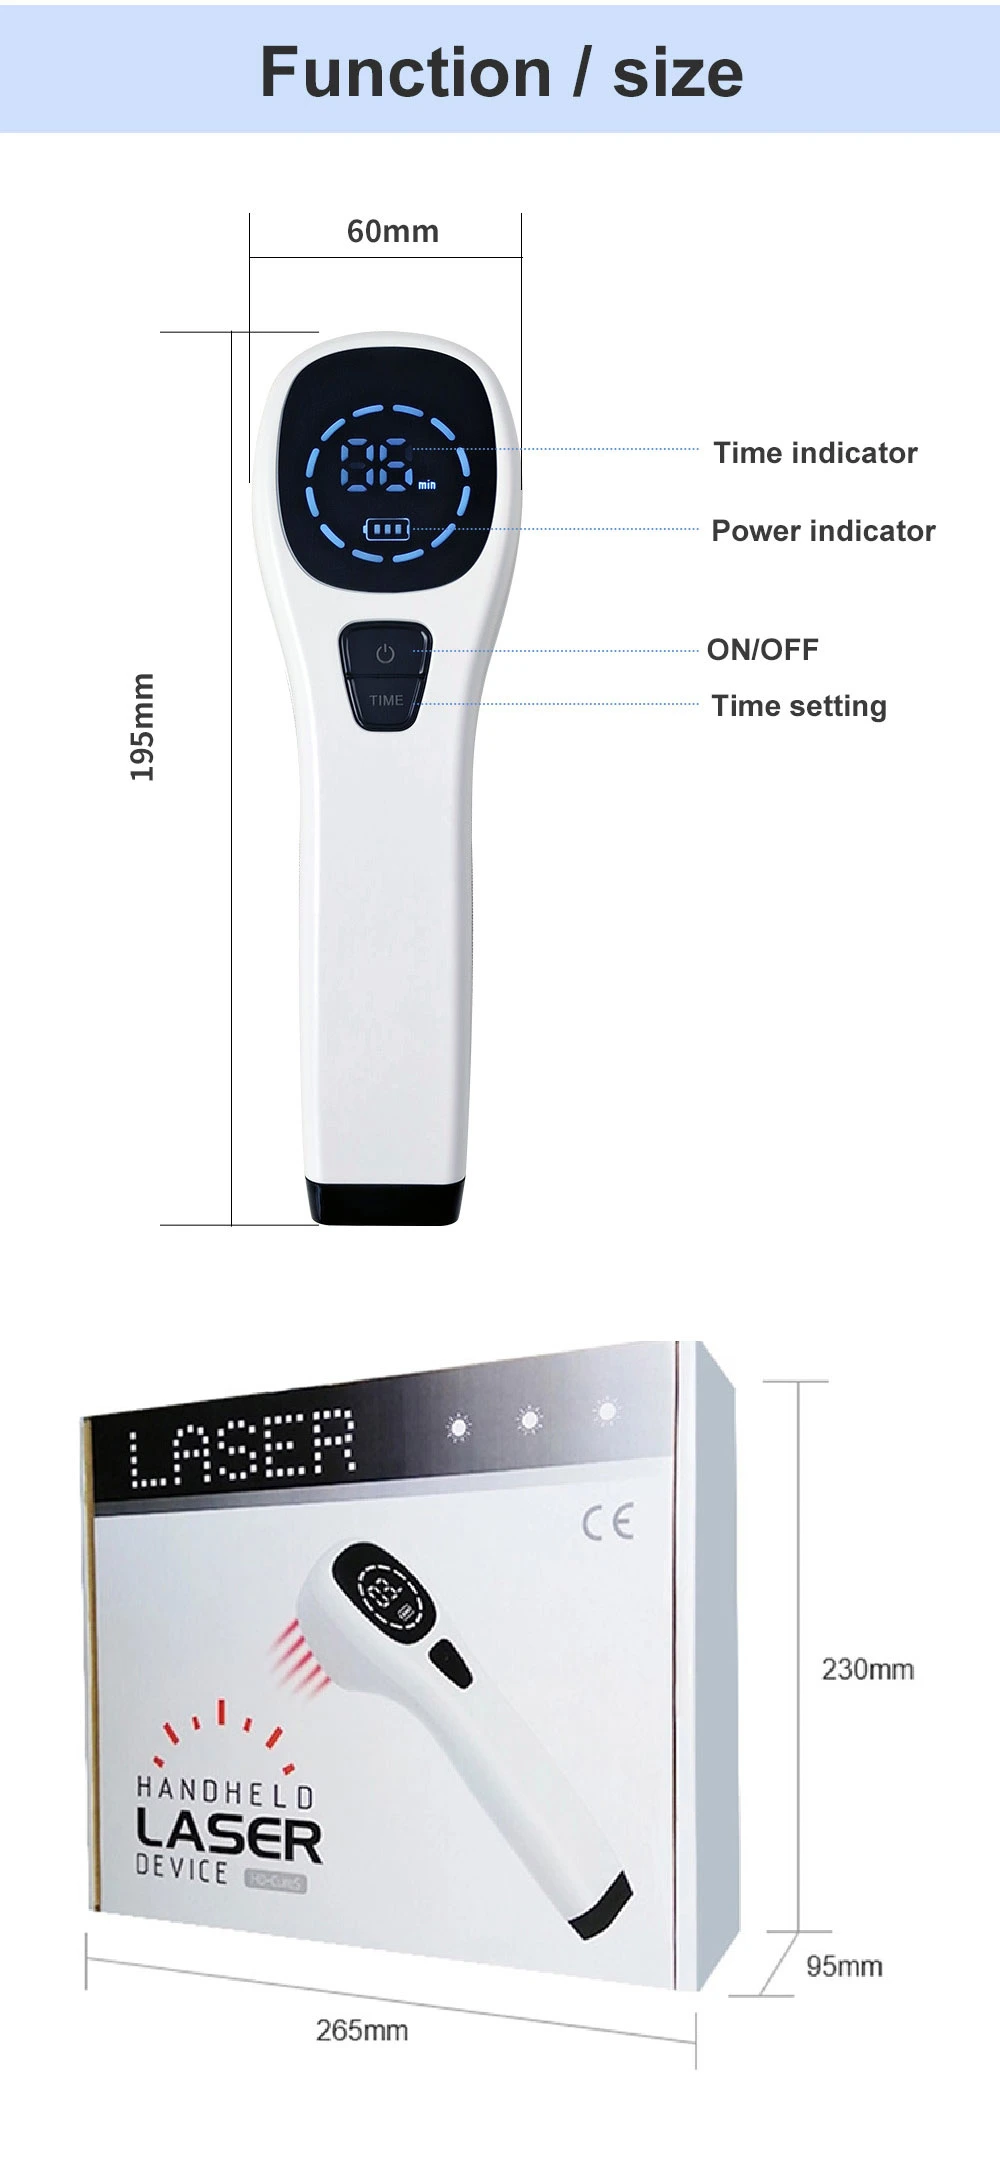 Handheld Low Level Laser Therapy Relief Therapy Device for Body Pain